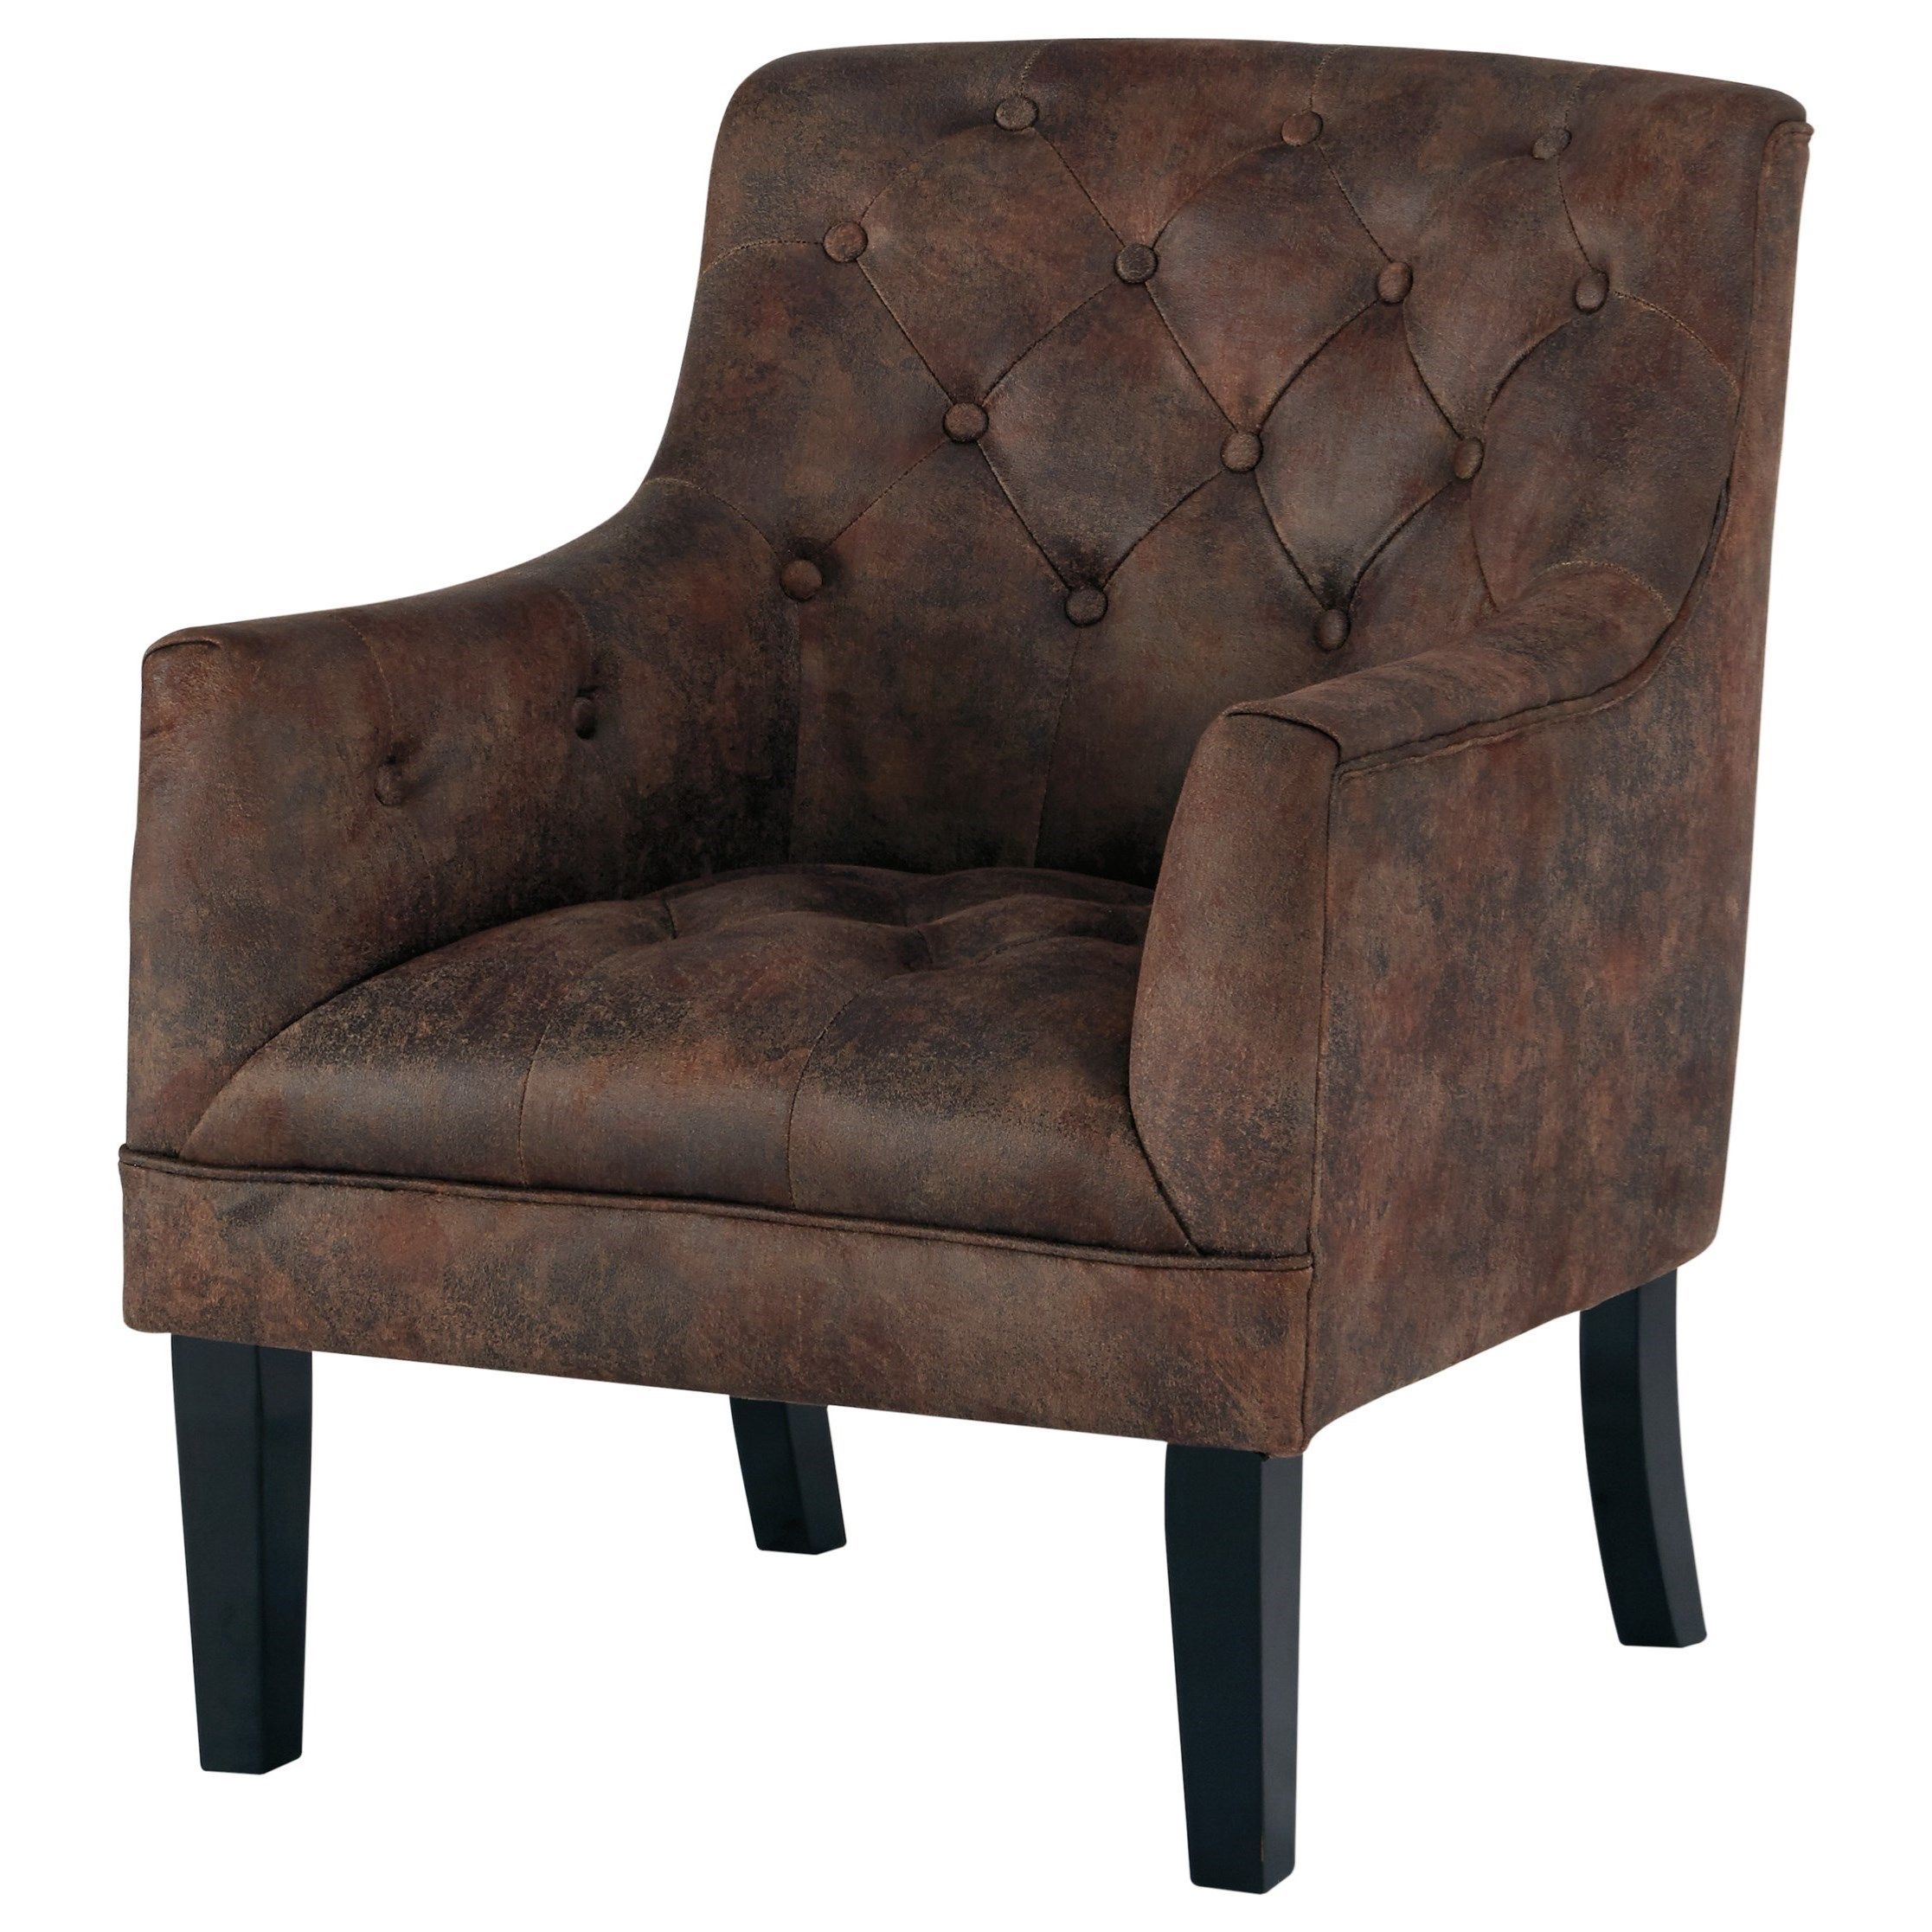 Drakelle Tufted Accent Chair In Distressed Brown Faux Leathersignature  Designashley At Household Furniture Regarding Faux Leather Upholstered Wooden Rocking Chairs With Looped Arms, Brown (View 13 of 20)